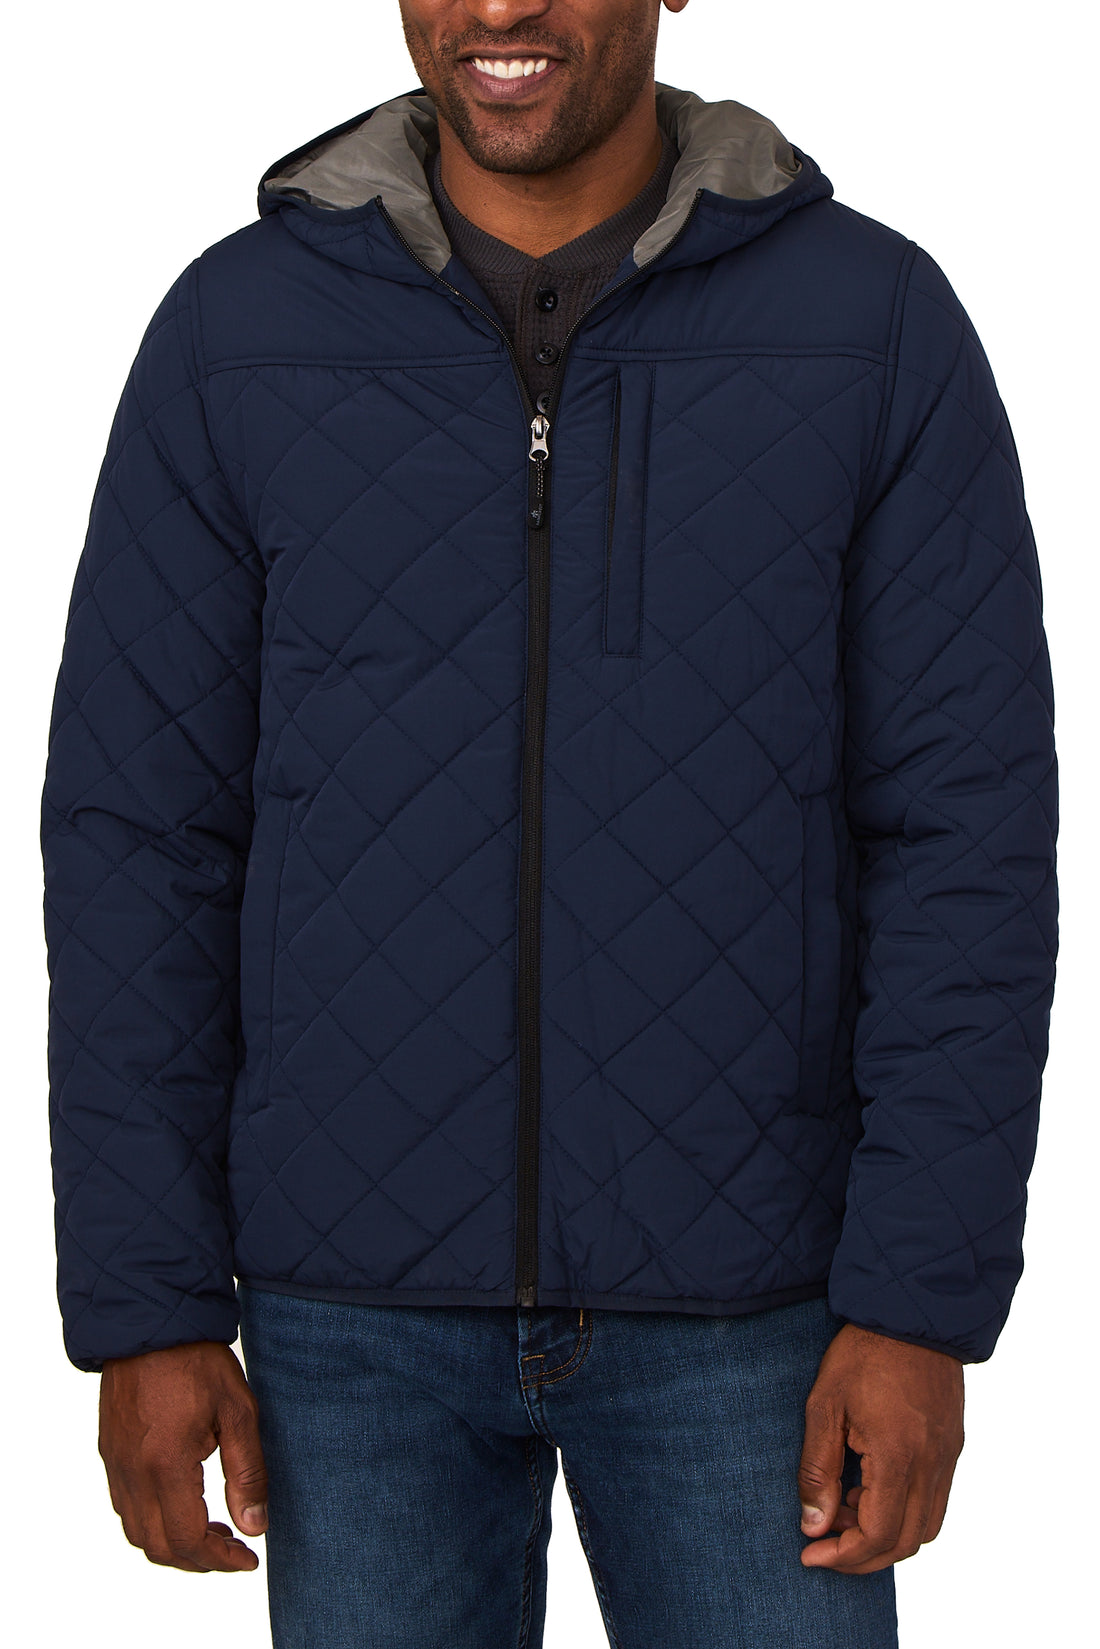 THE SQUALL HOODED JACKET